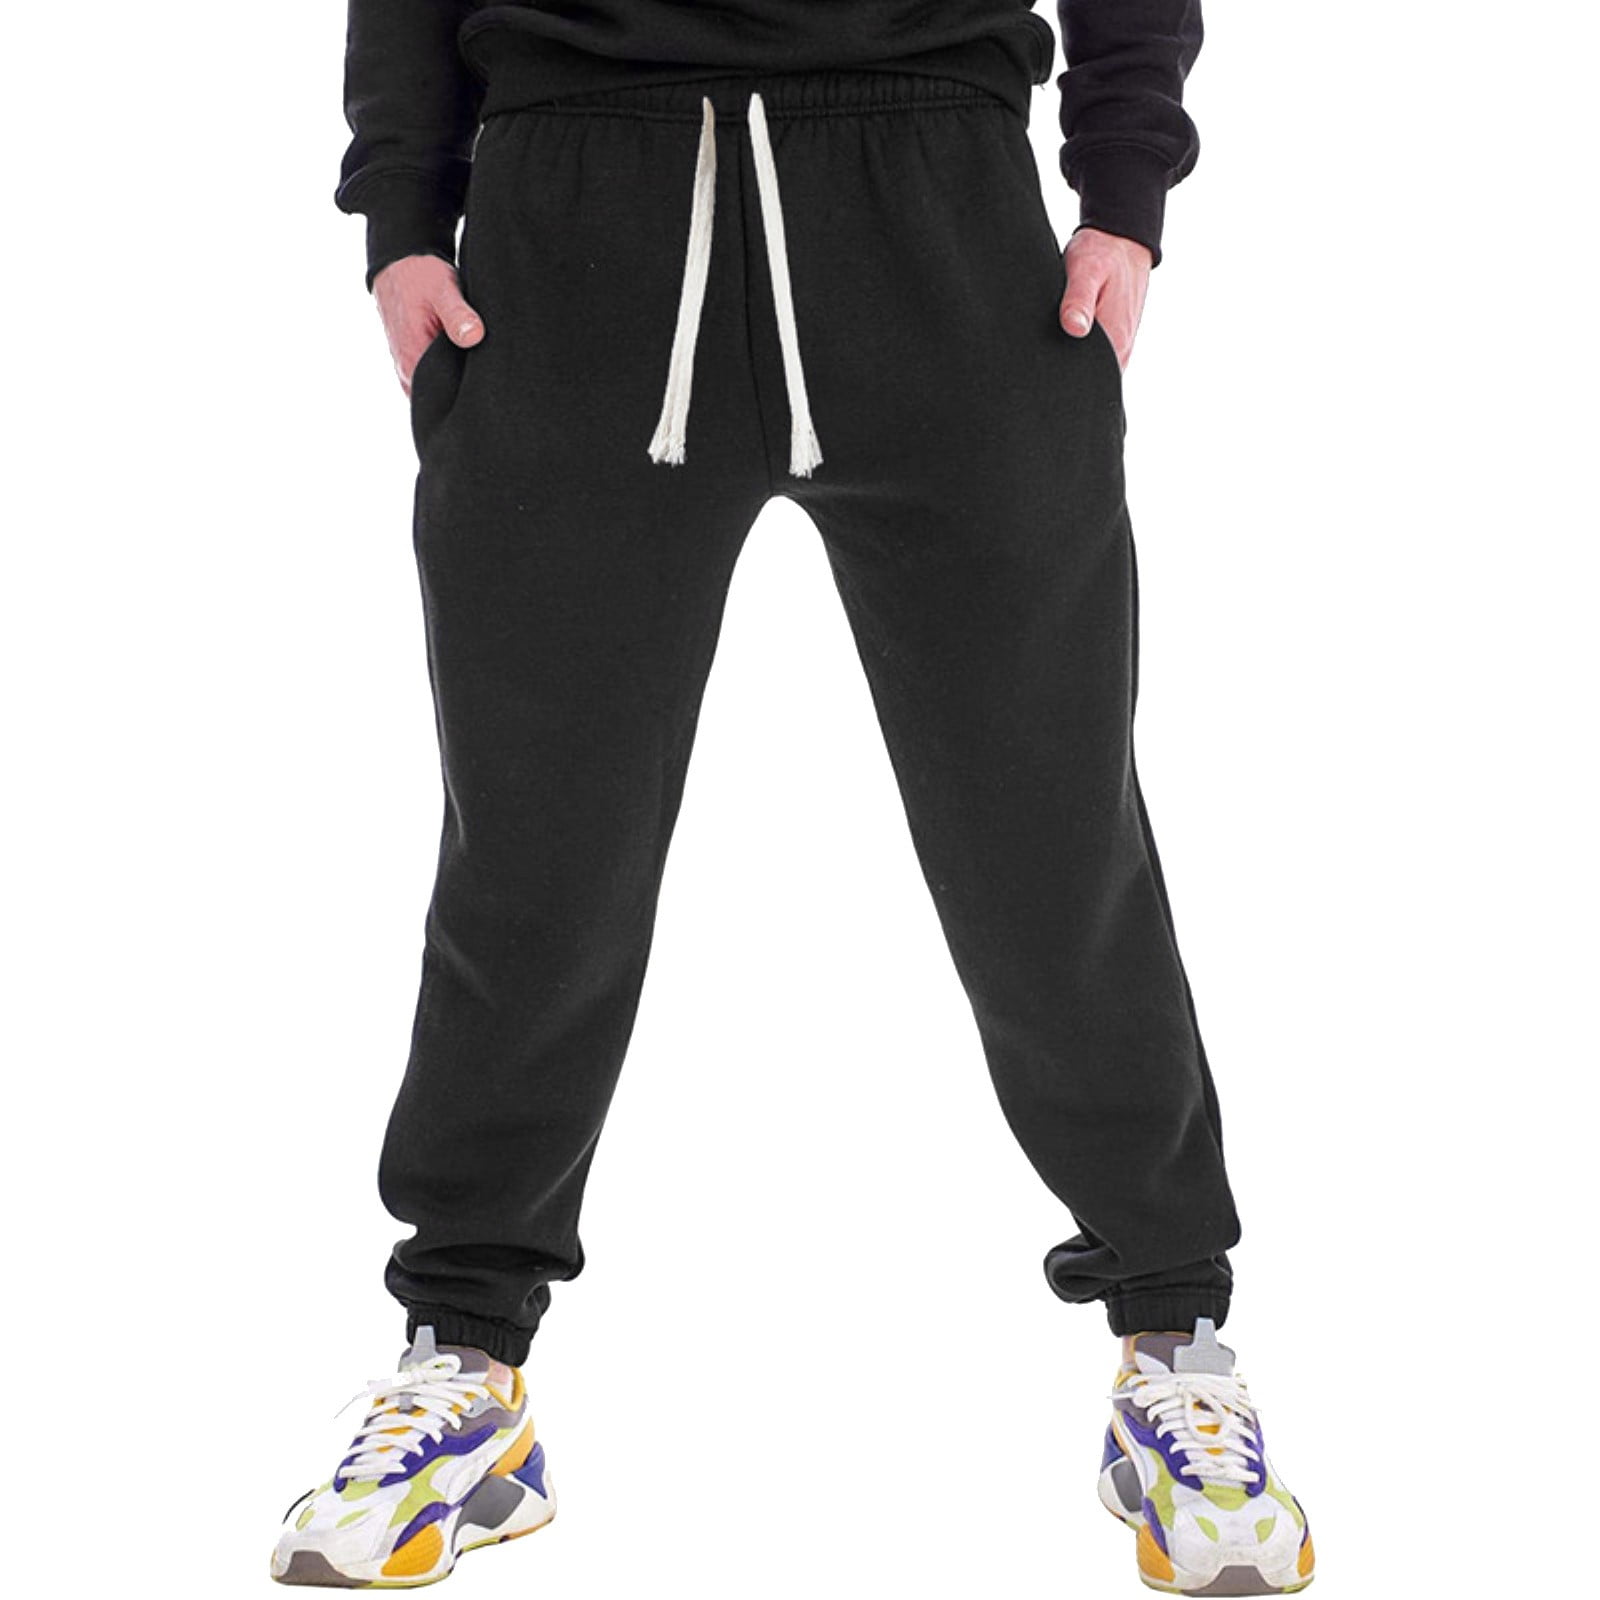 Wozhidaoke mens sweatpants Male All Matching Color Drawstring Loose ...